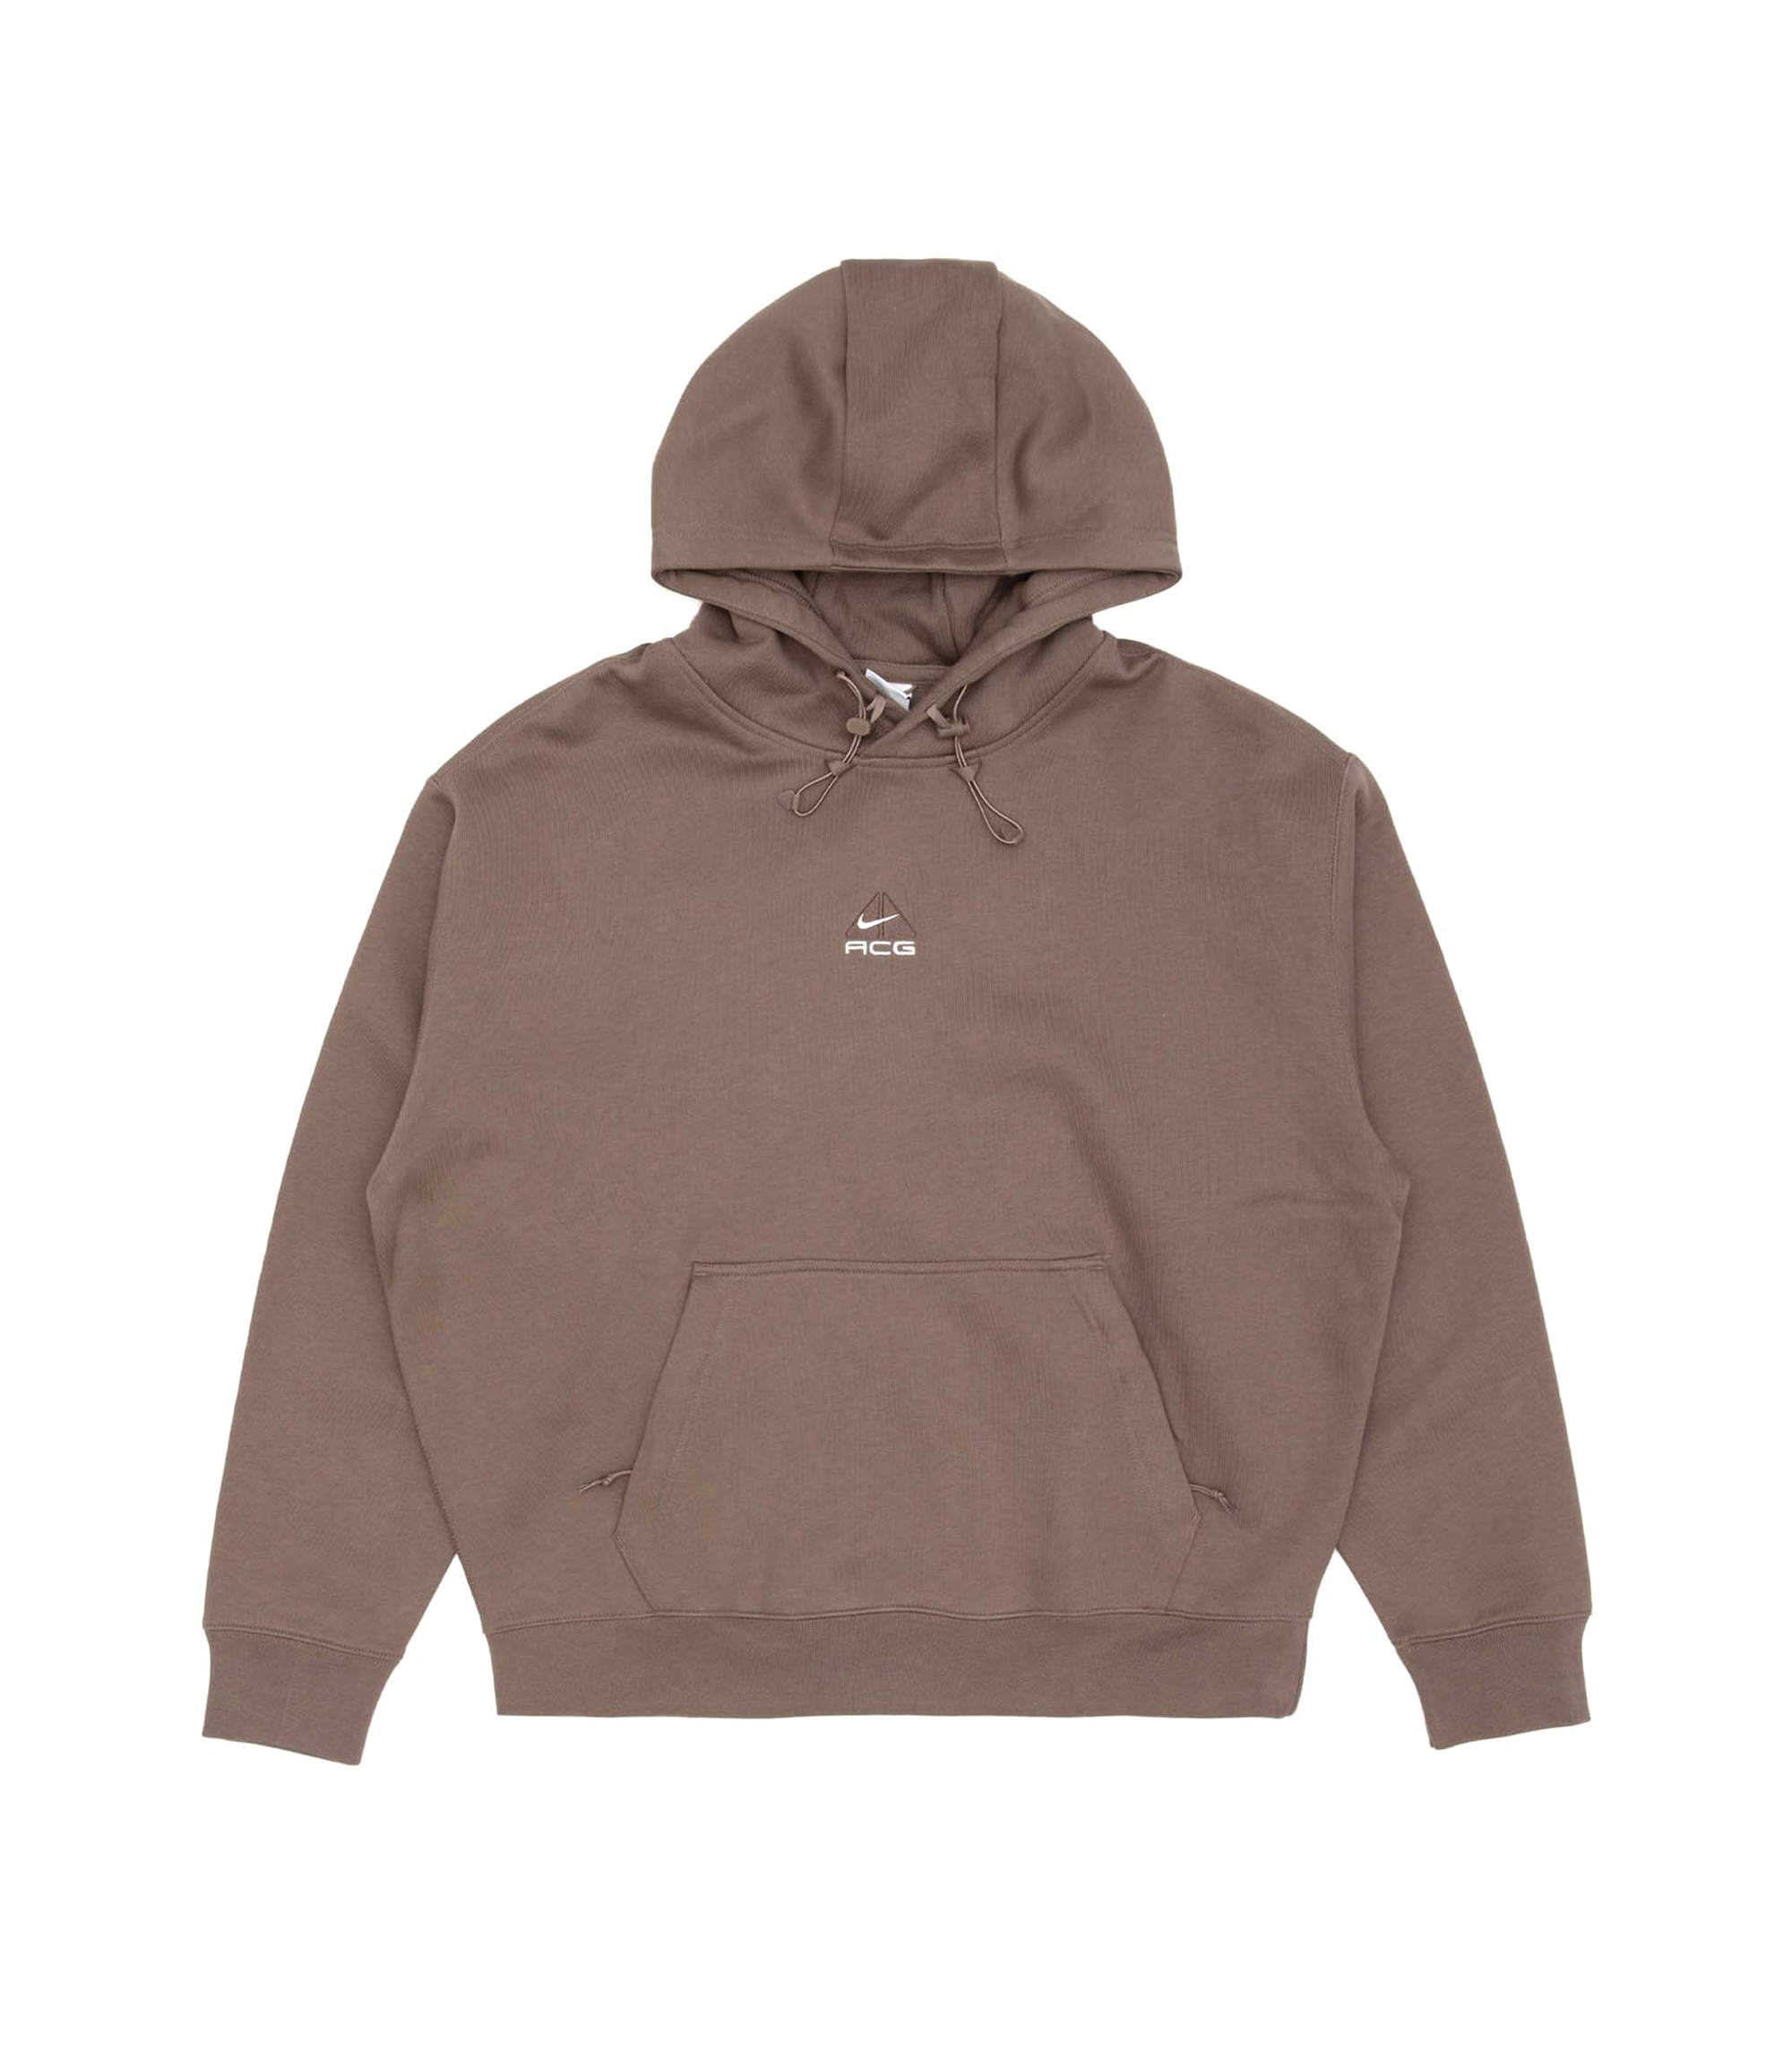 Therma-Fit Fleece Pullover Hoodie - Olive Gray / Ironstone